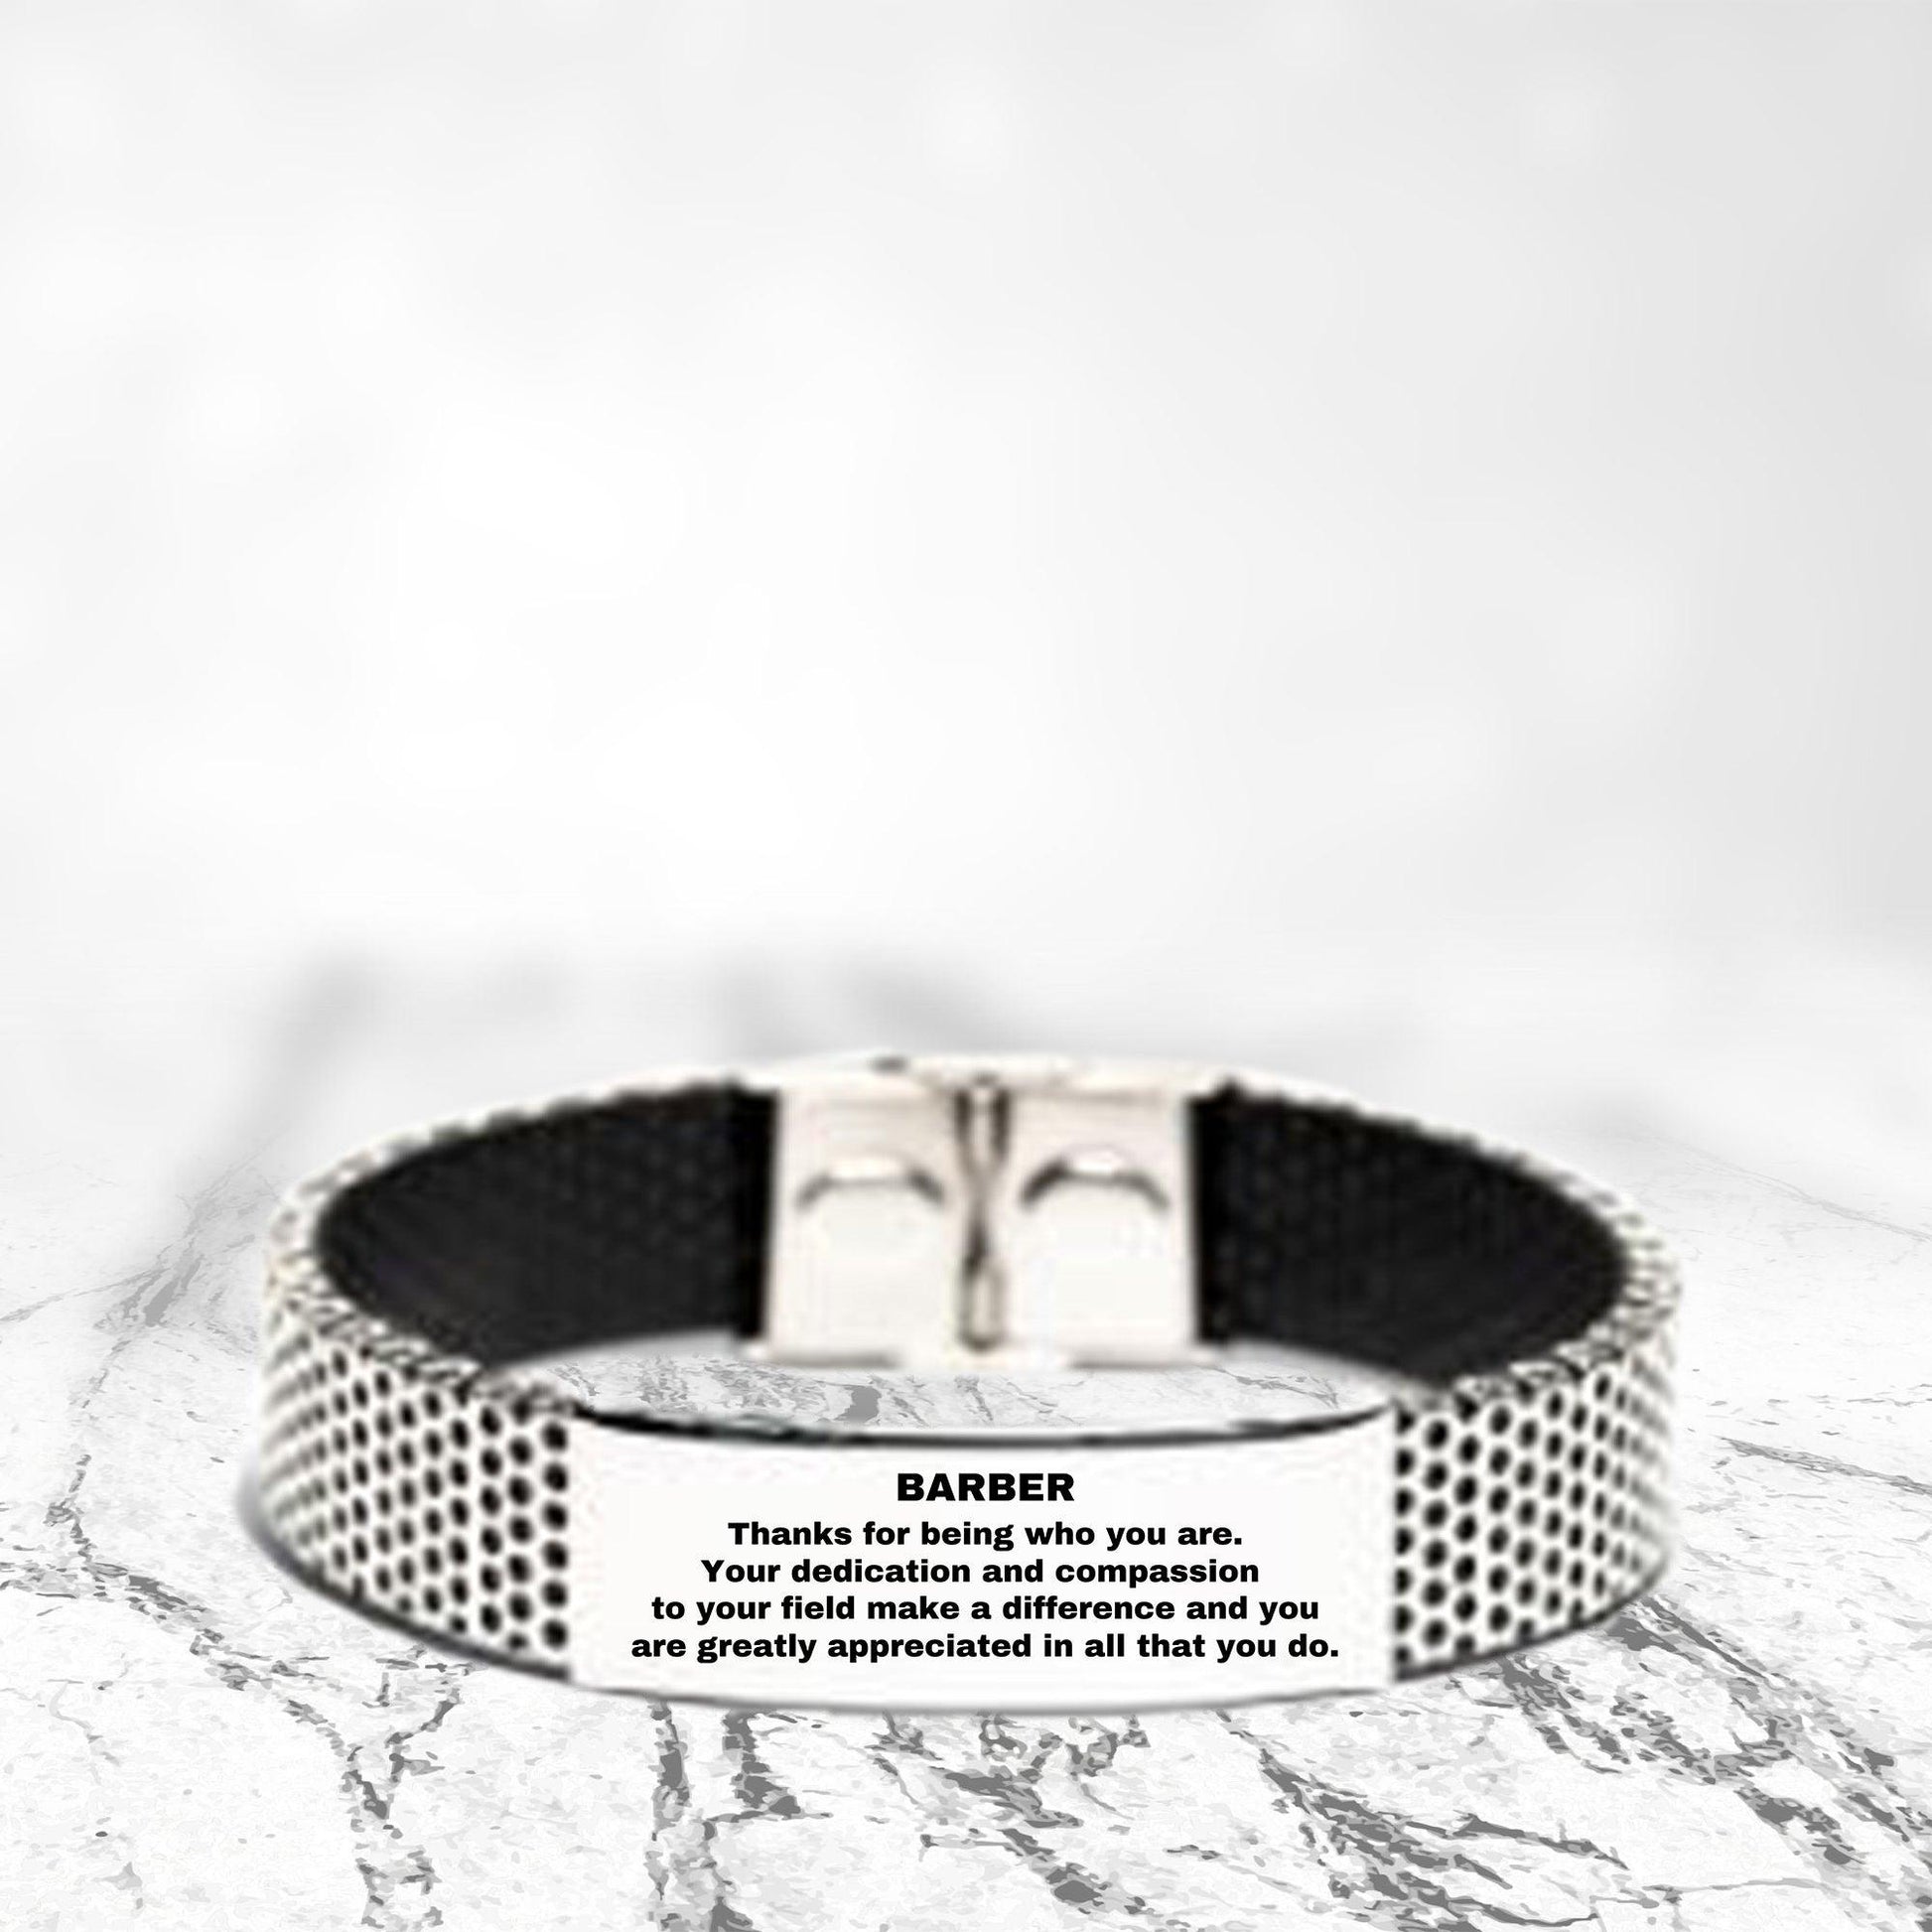 Barber Silver Shark Mesh Stainless Steel Engraved Bracelet - Thanks for being who you are - Birthday Christmas Jewelry Gifts Coworkers Colleague Boss - Mallard Moon Gift Shop